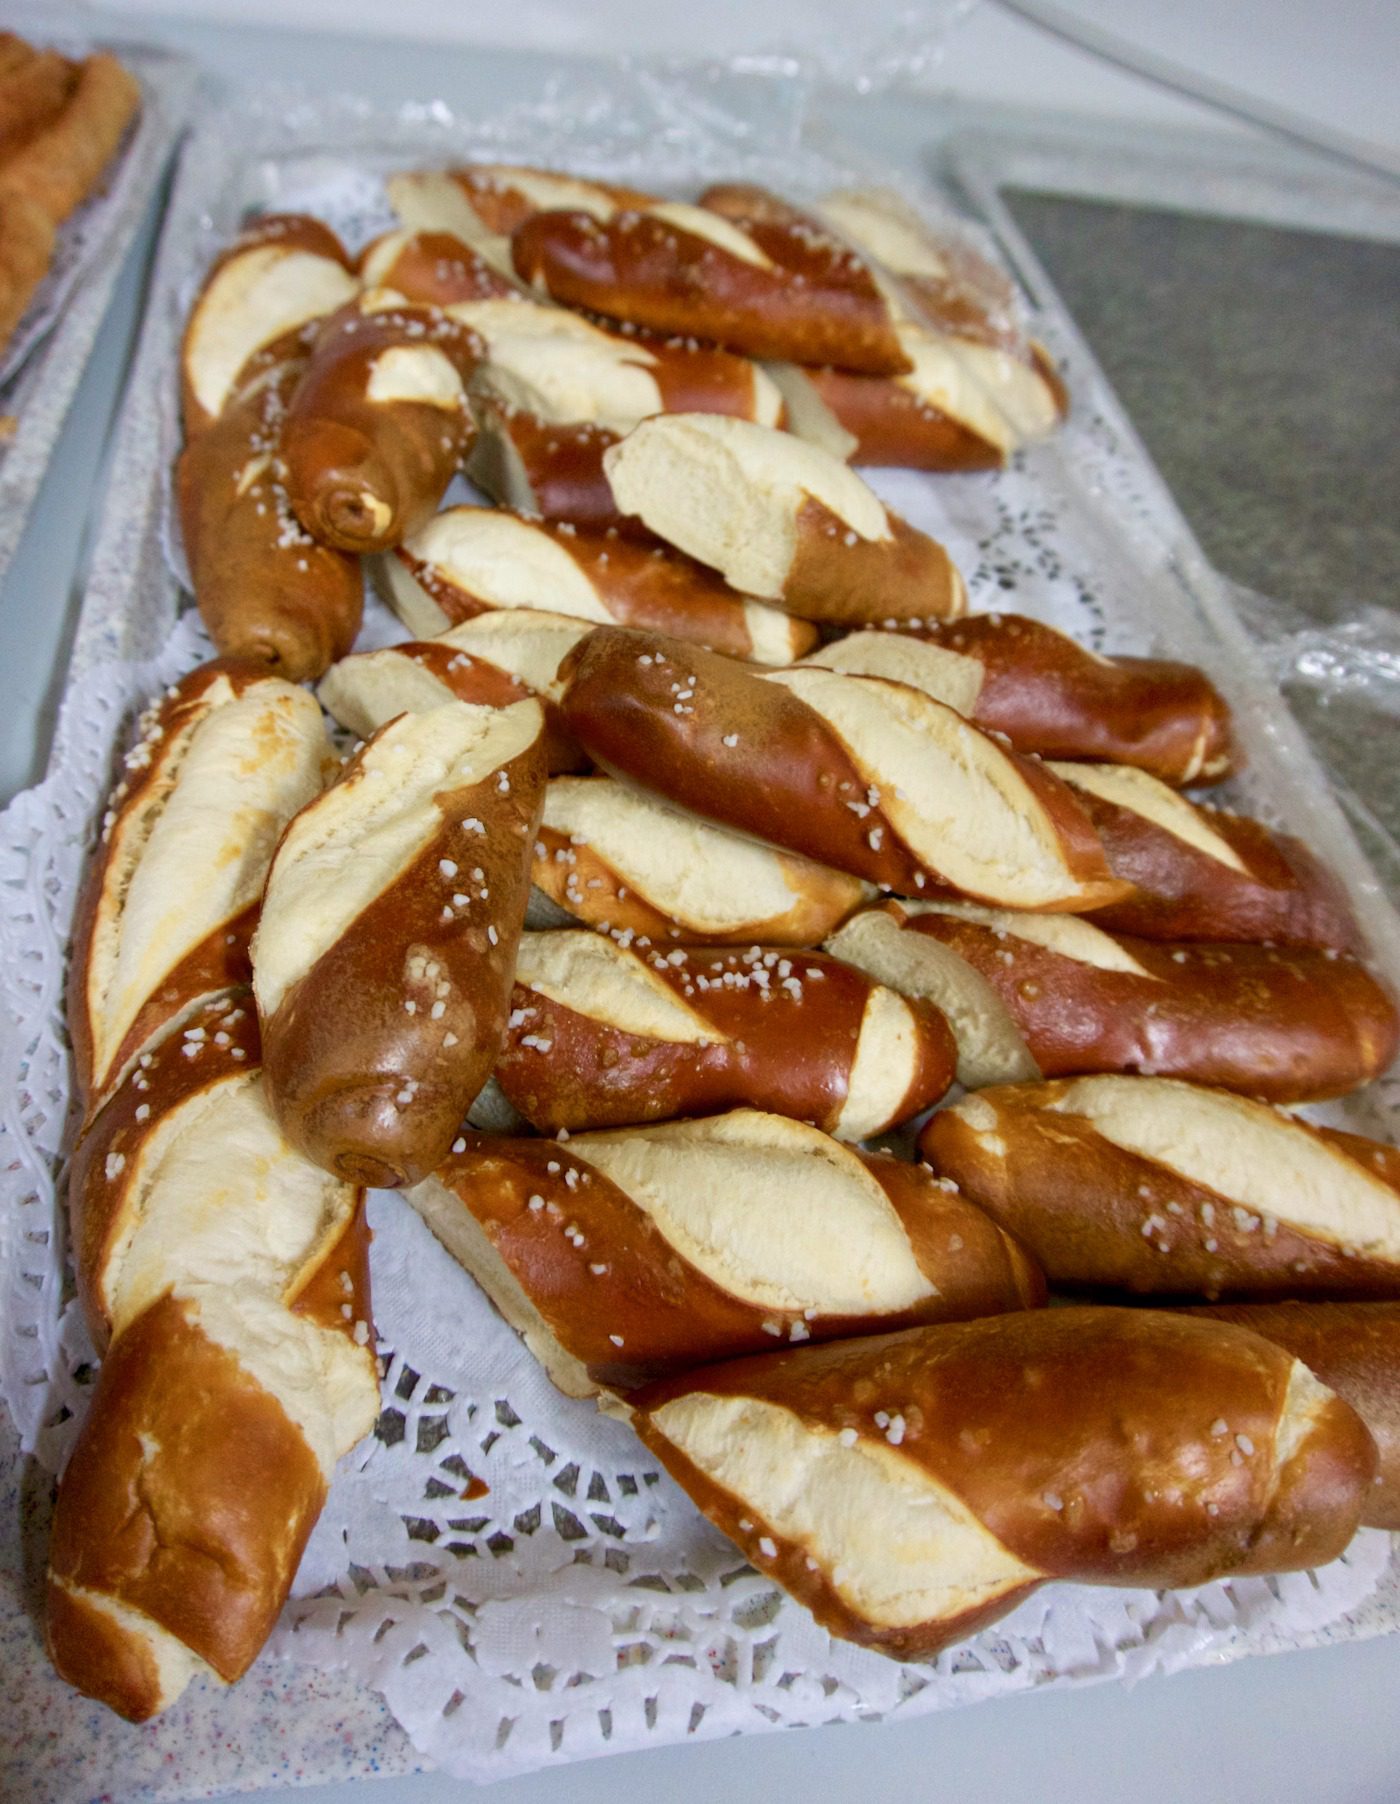 Pretzels in Germany, seen on a teacher fellowship to study history.